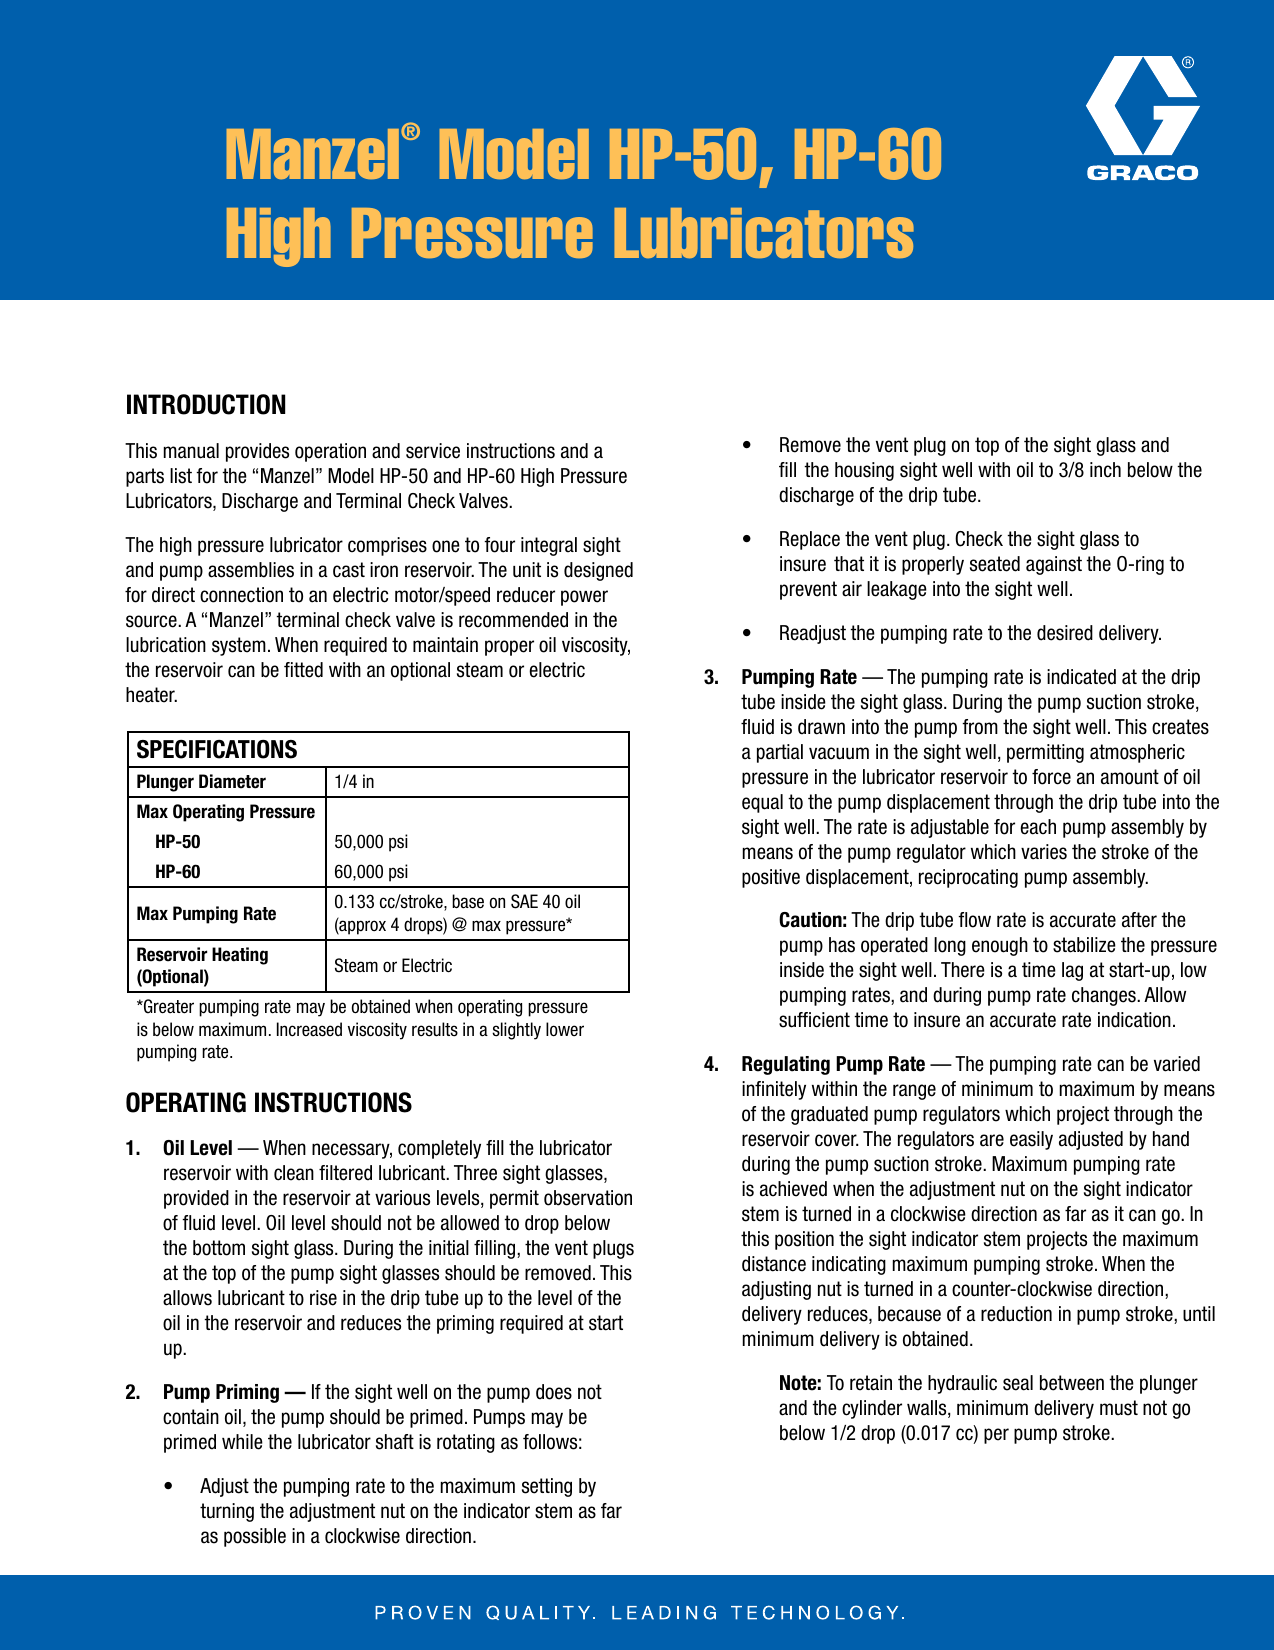 Page 1 of 4 - Graco Graco-Manzel--Hp-50-Hp-60-High-Pressure-Lubricators-Users-Manual-  Graco-manzel--hp-50-hp-60-high-pressure-lubricators-users-manual